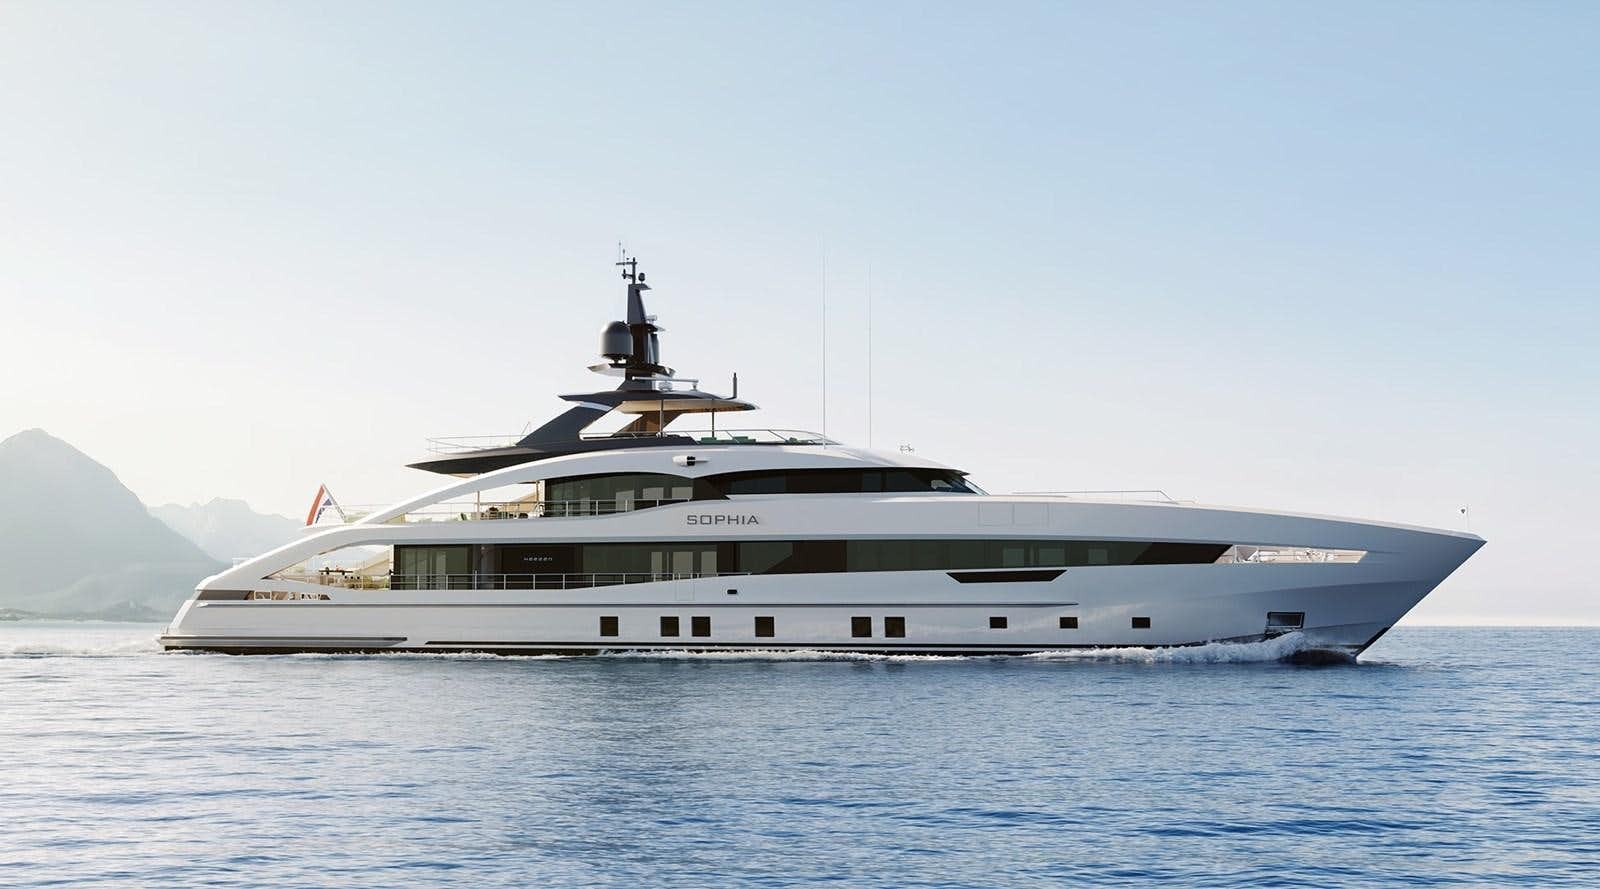 Project sophia
Yacht for Sale